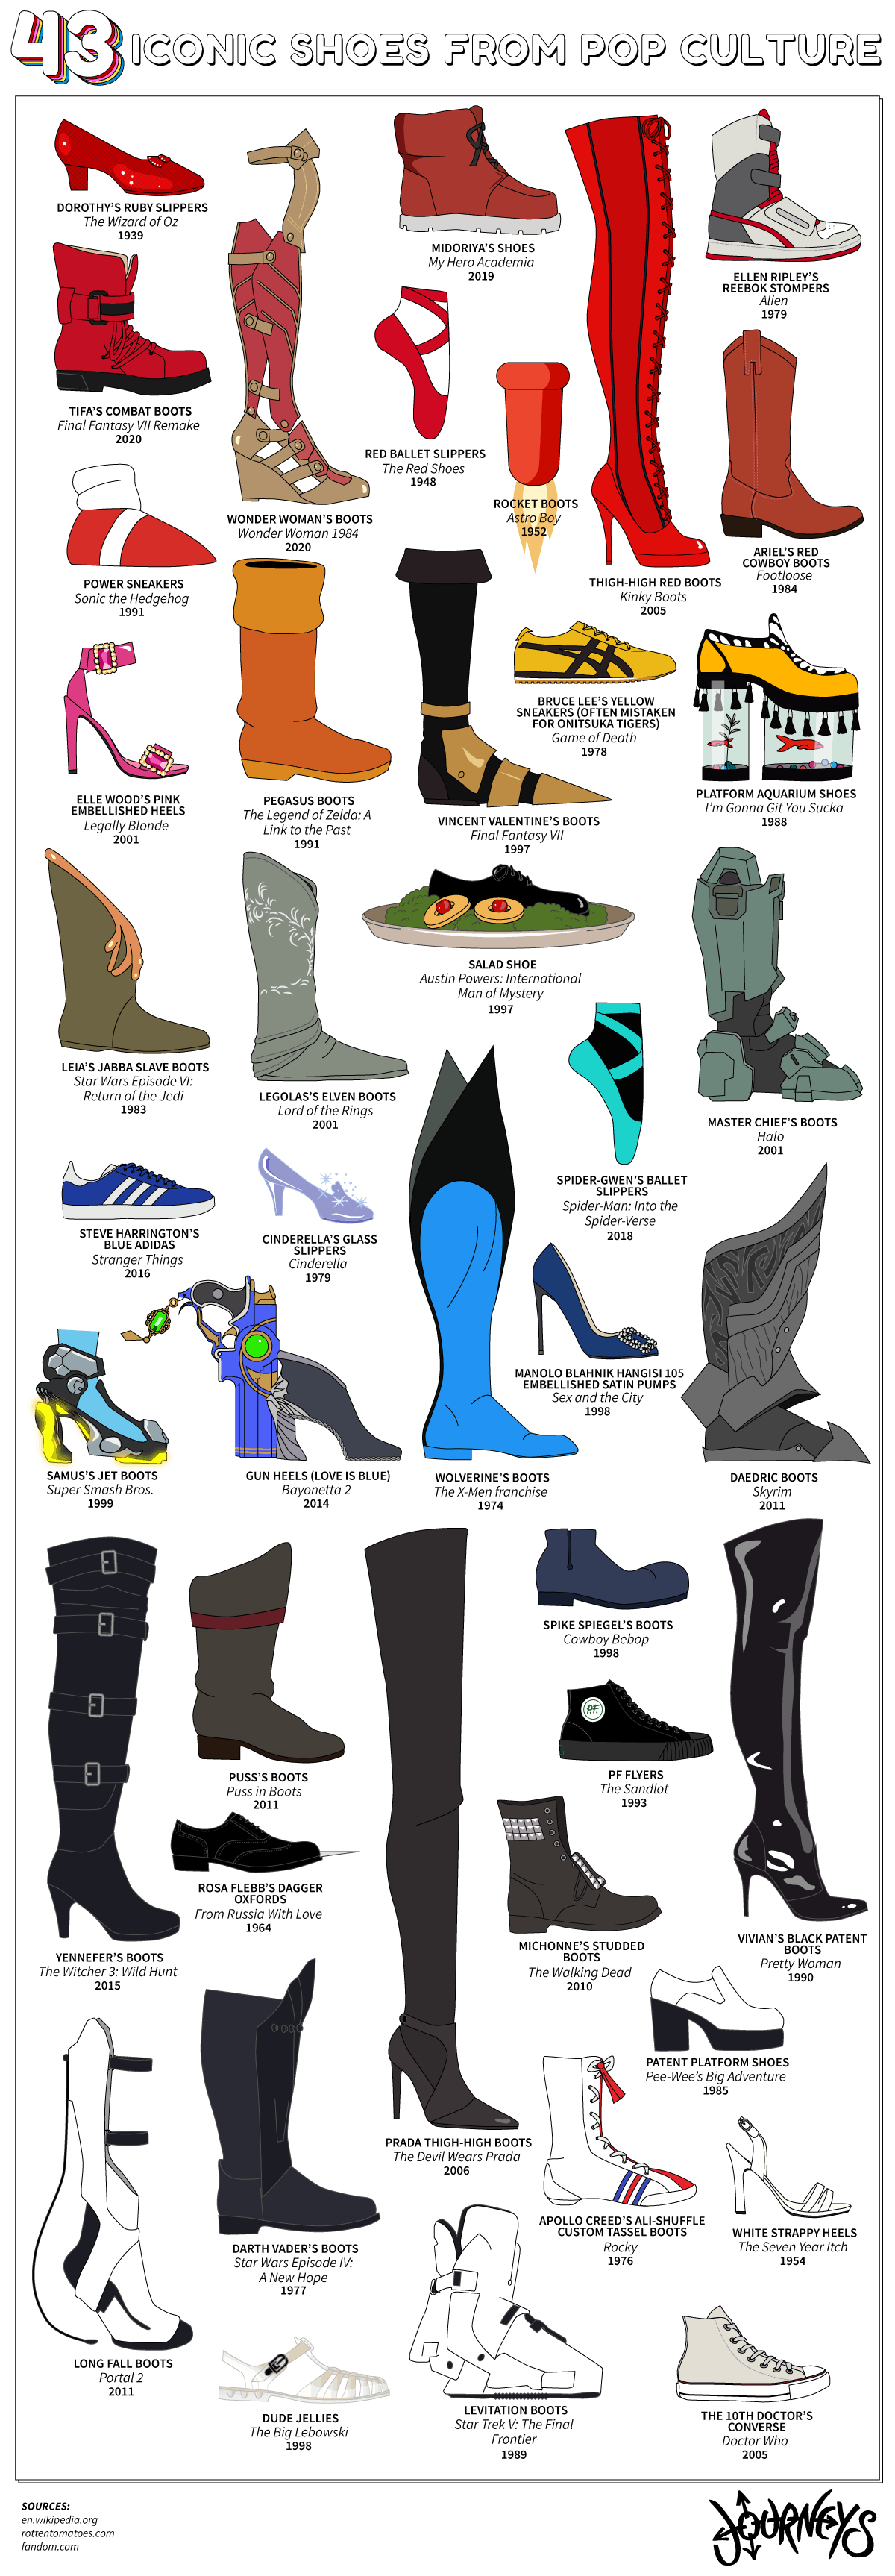 graphic showing popular shoes from movies and television